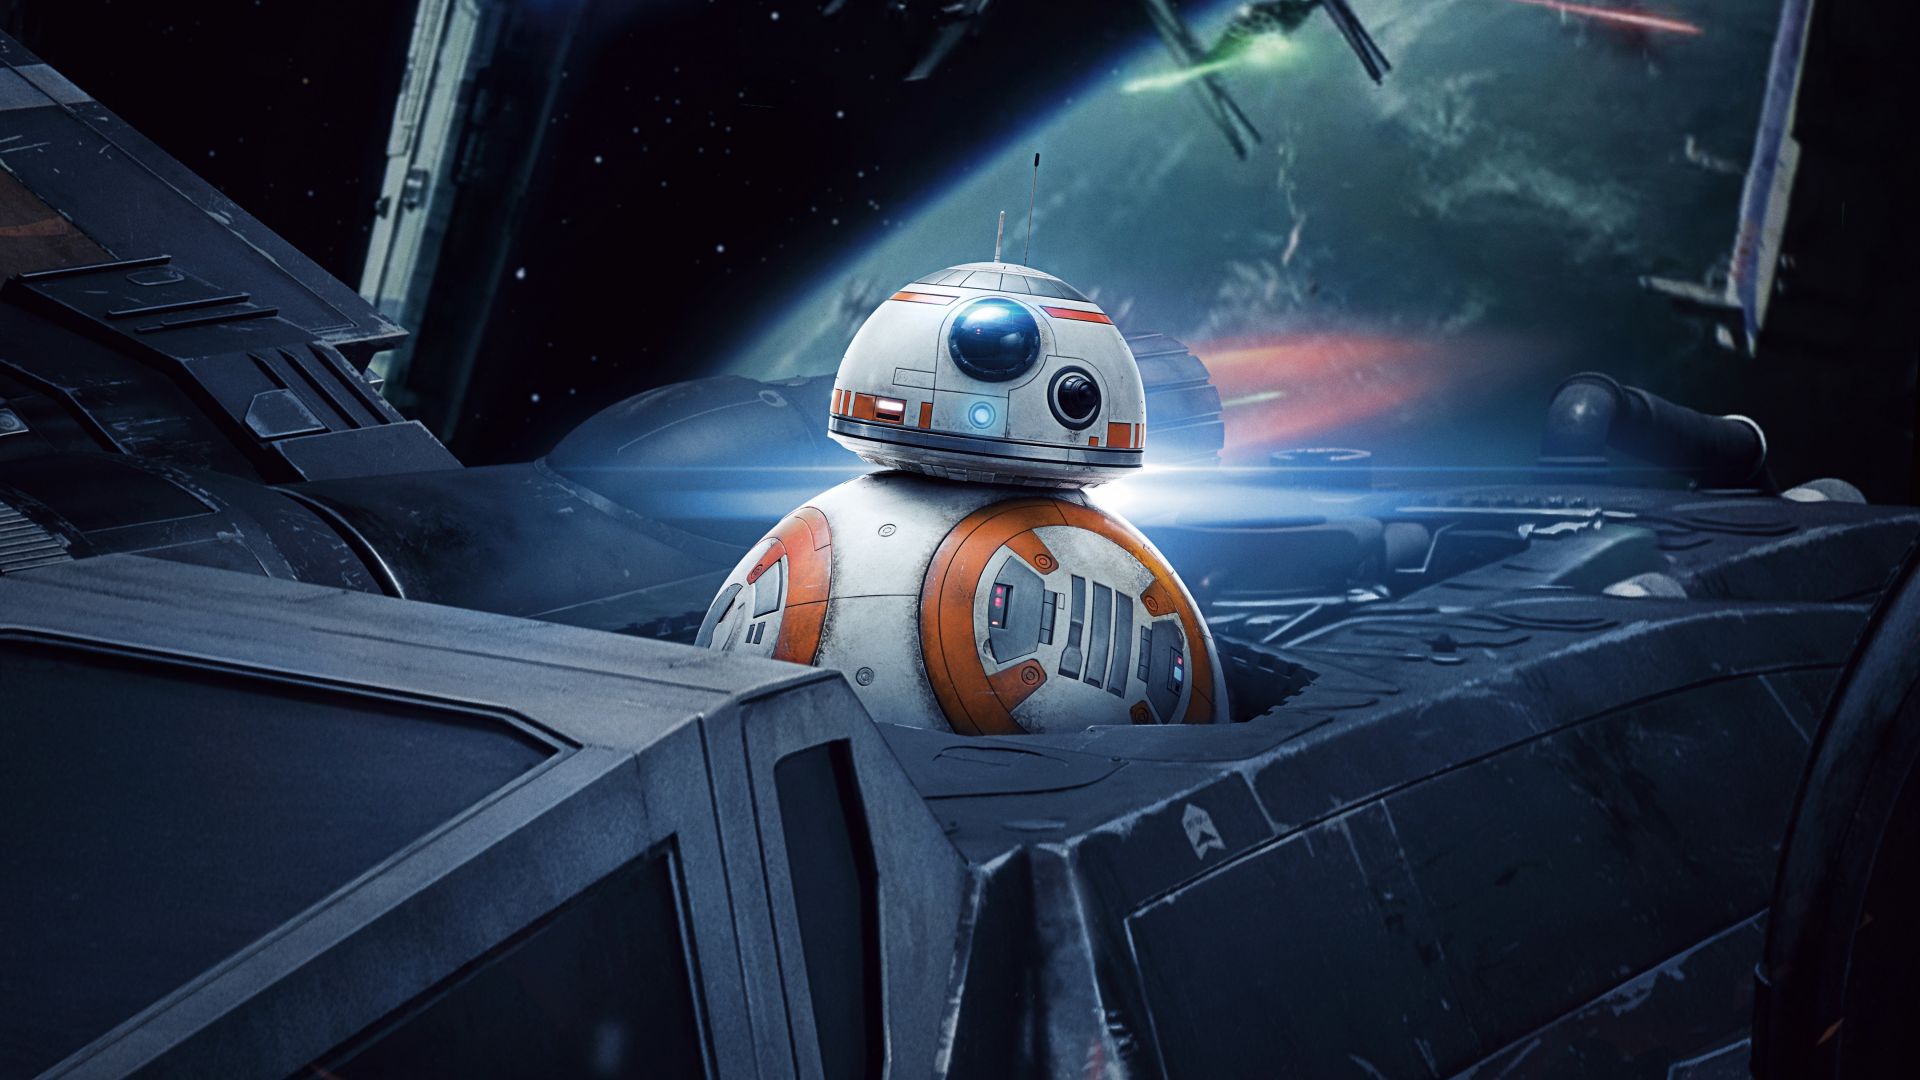 Download R2 D2 wallpapers for mobile phone free R2 D2 HD pictures